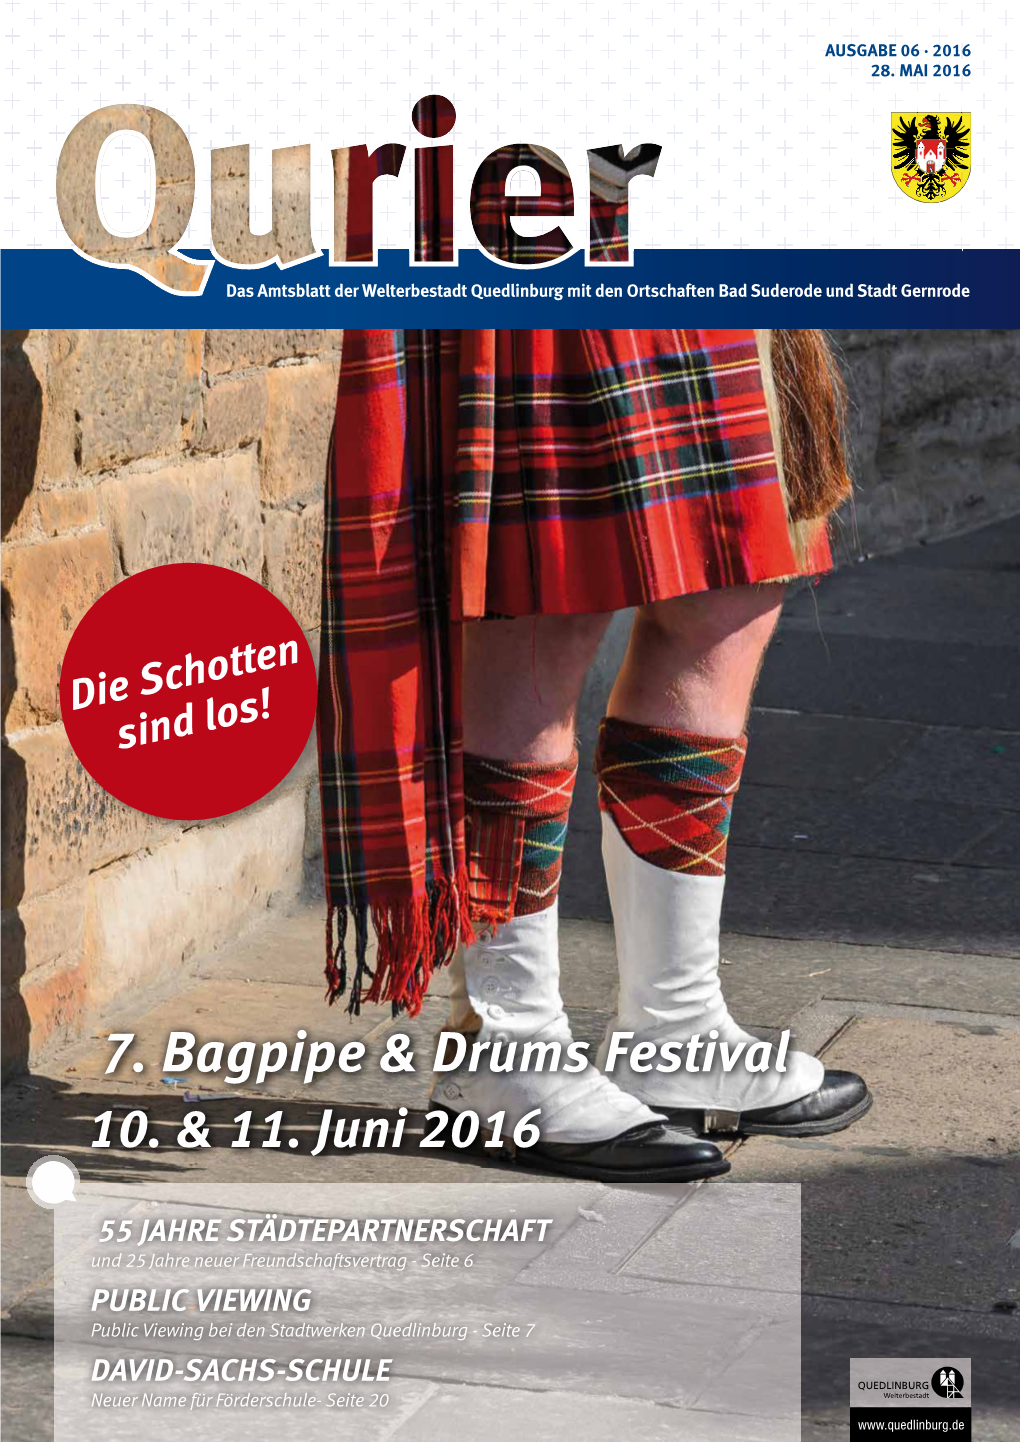 7. Bagpipe & Drums Festival